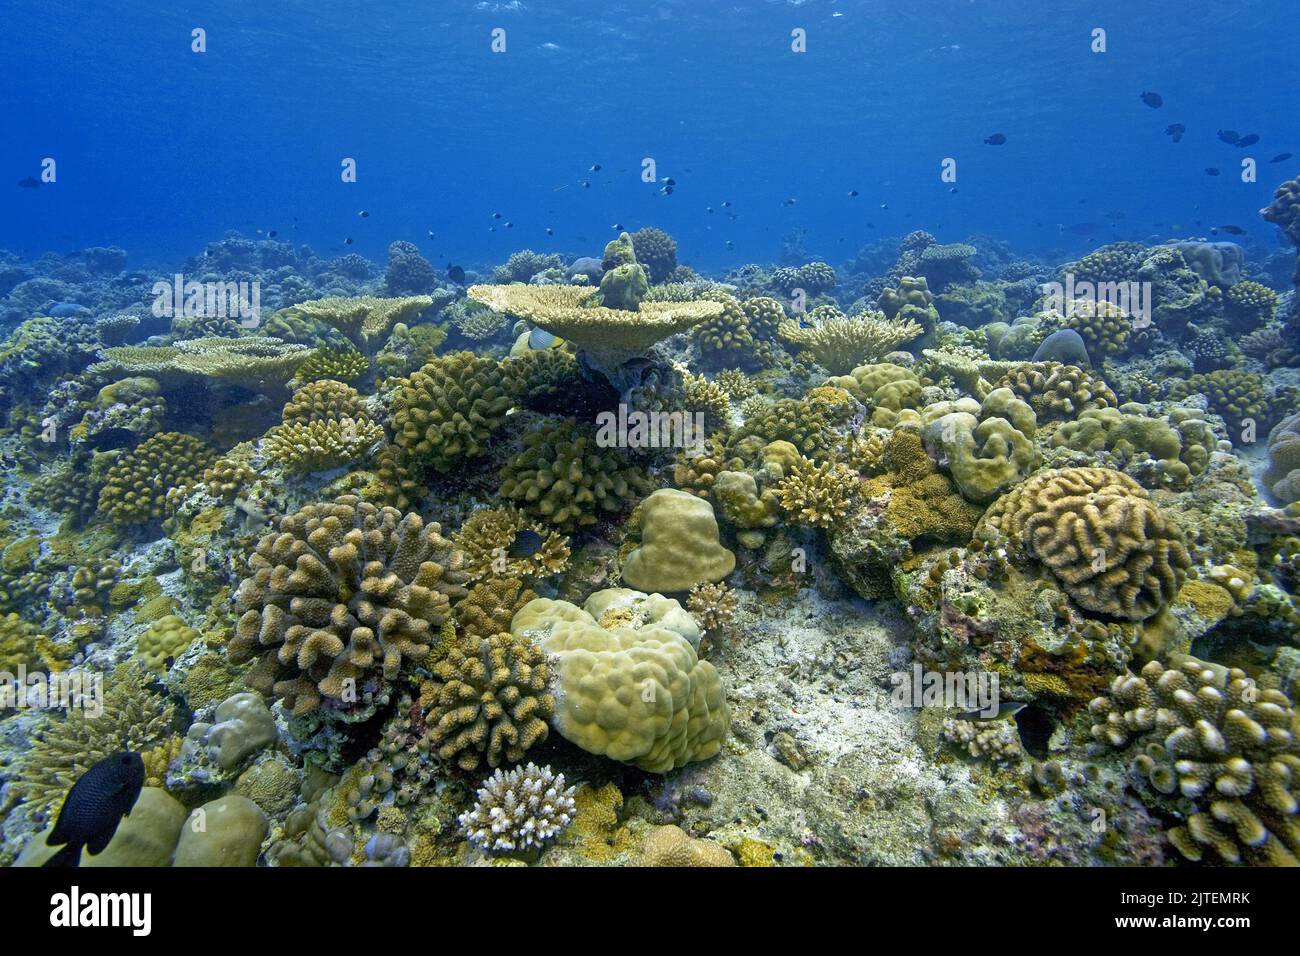 Intact coral reef with dominating stone corals, Maldives, Indian ocean, Asia Stock Photo